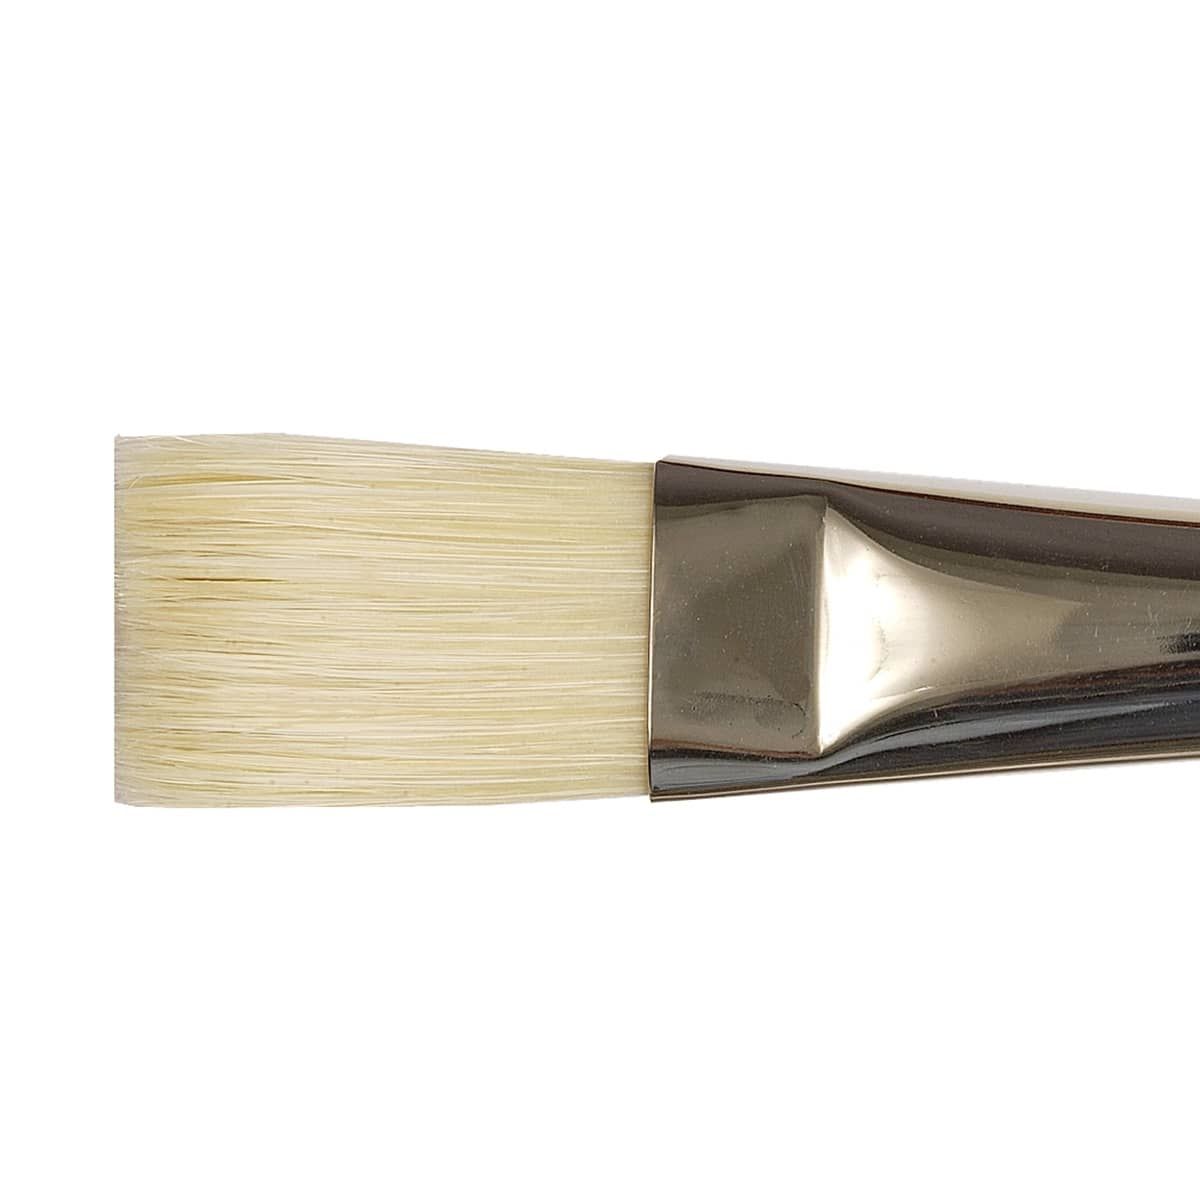 Isabey Special Brush Series 6086 Flat #12